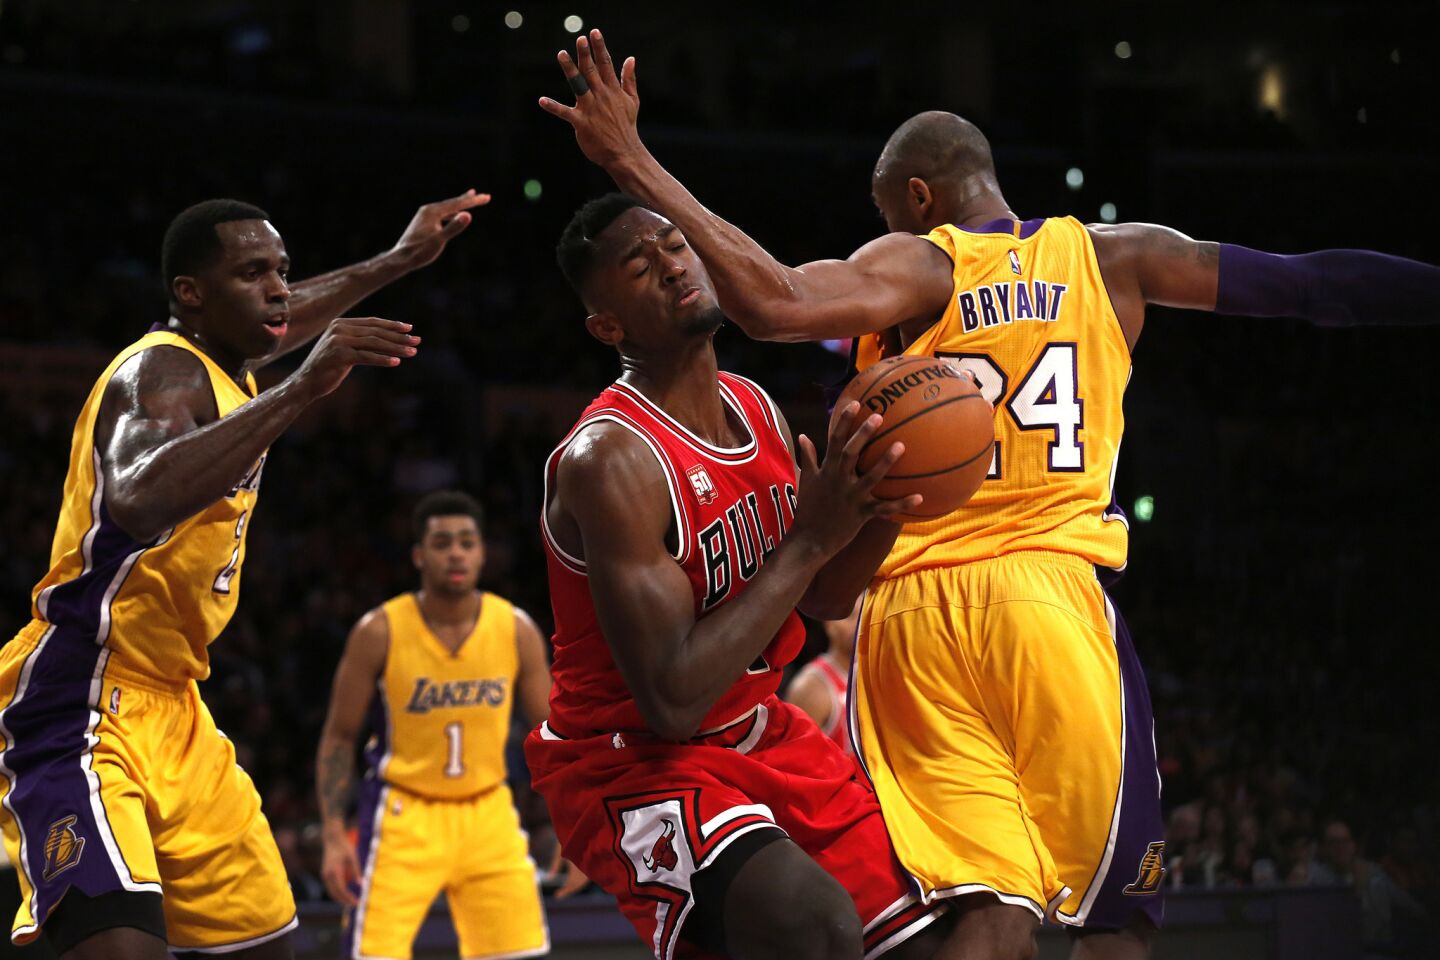 Lakers guard Kobe Bryant (24) is called for a foul as Bulls guard Bobby Portis, center, slices through the defense of Bryant and Lakers forward Brandon Bass.